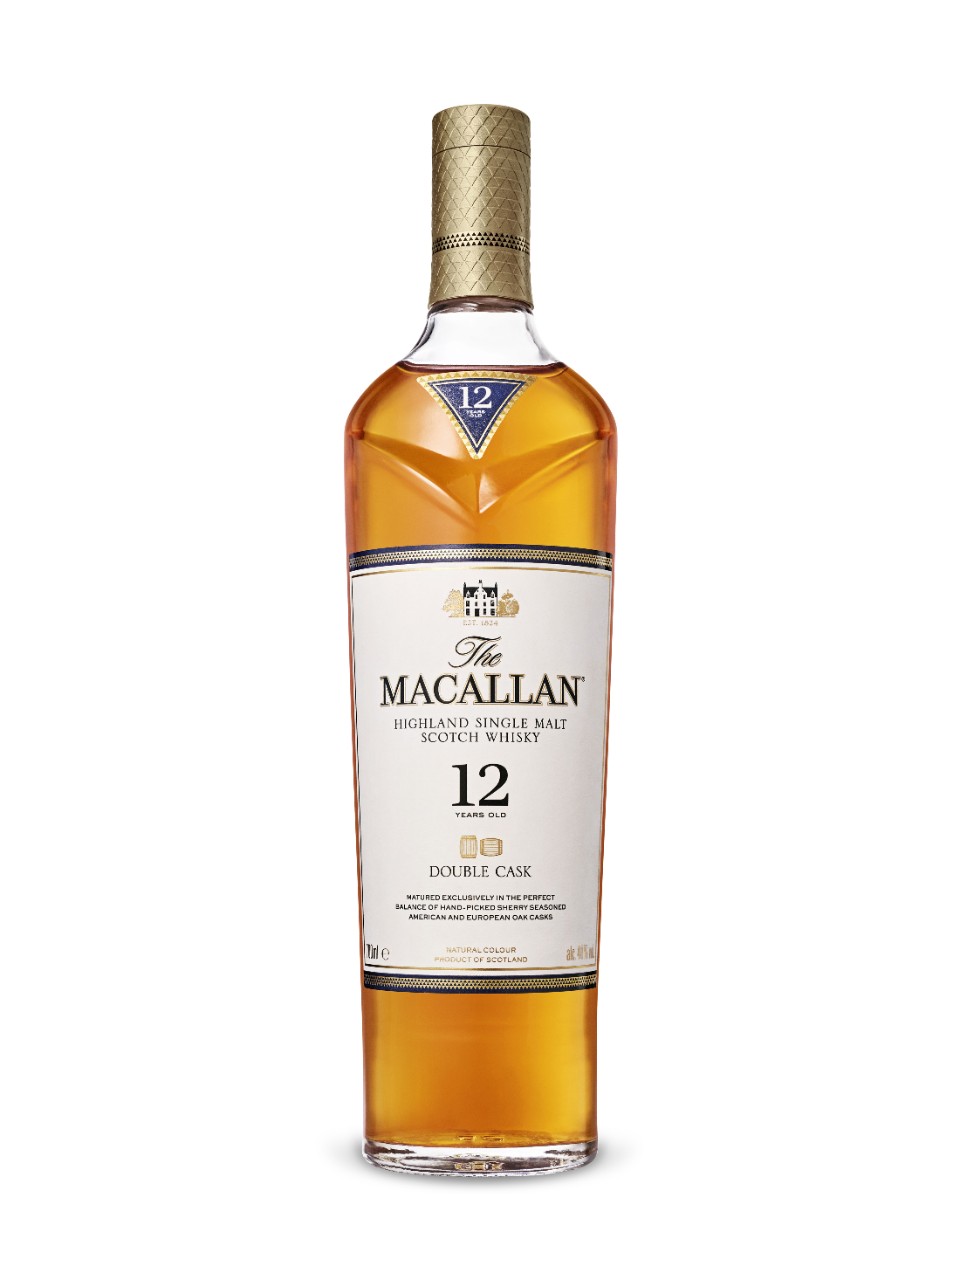 2. Scotch Whisky – The Macallan Sherry Oak 12 Years Old 